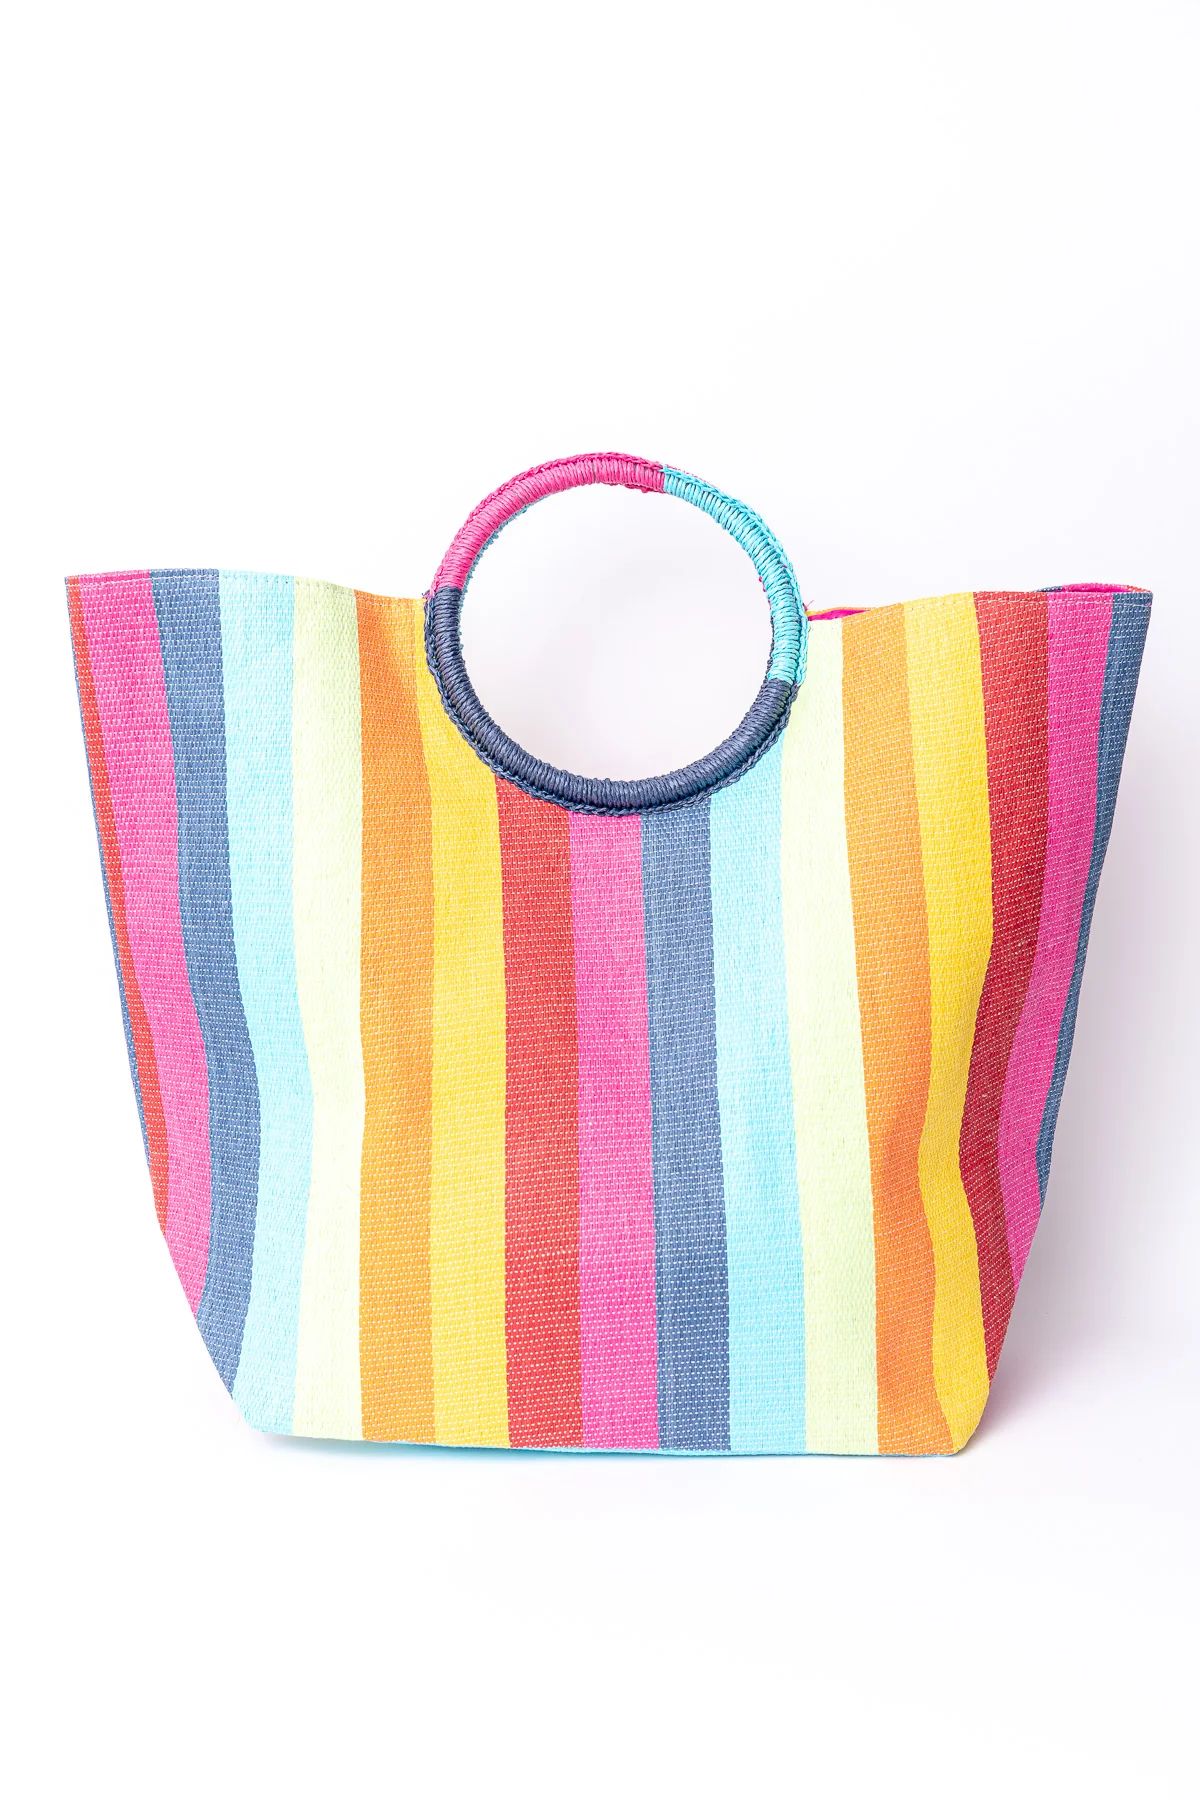 Rainbow Tote Bag | South Moon Under